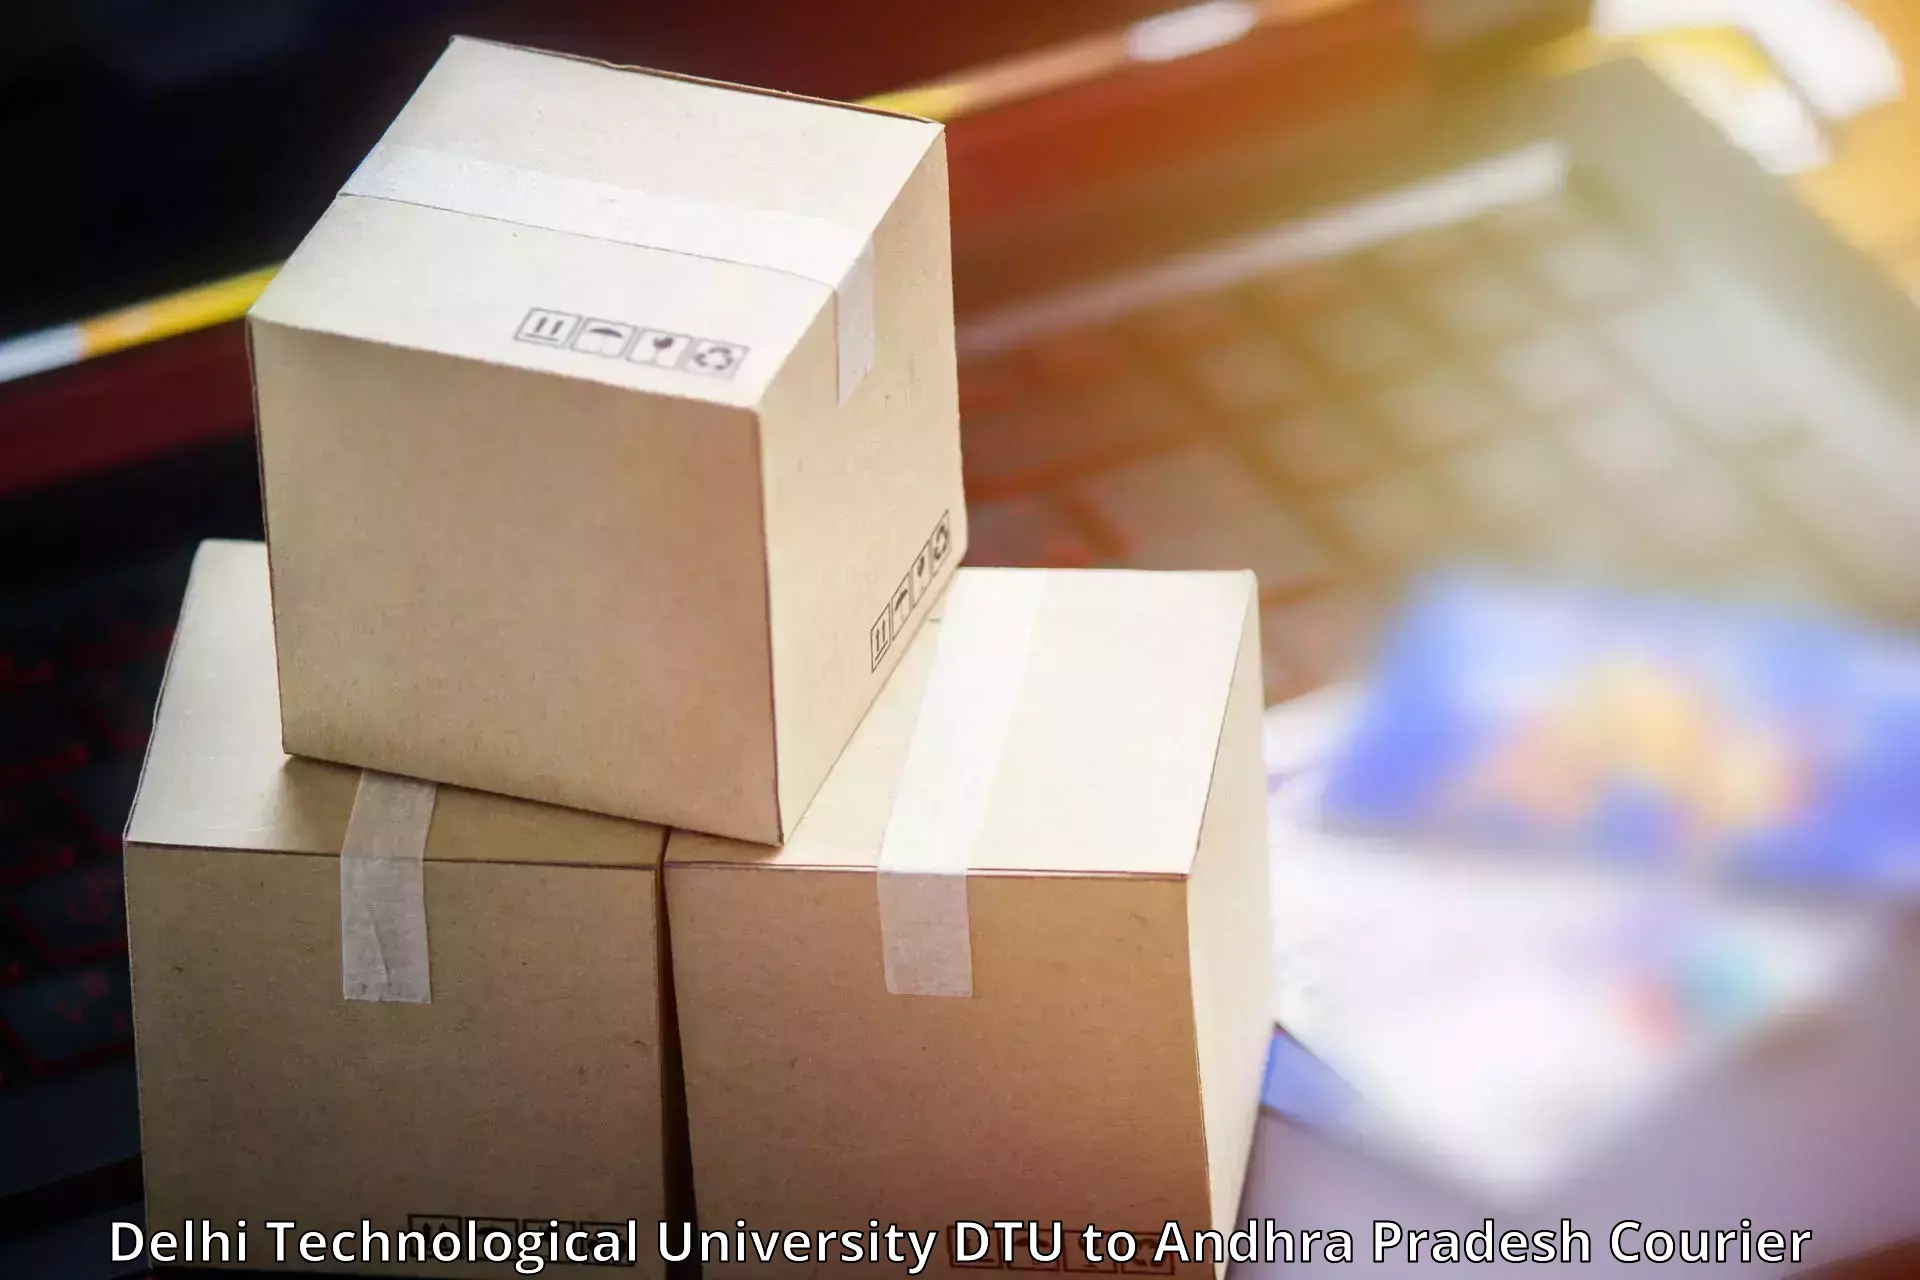 Tailored freight services Delhi Technological University DTU to Chirala